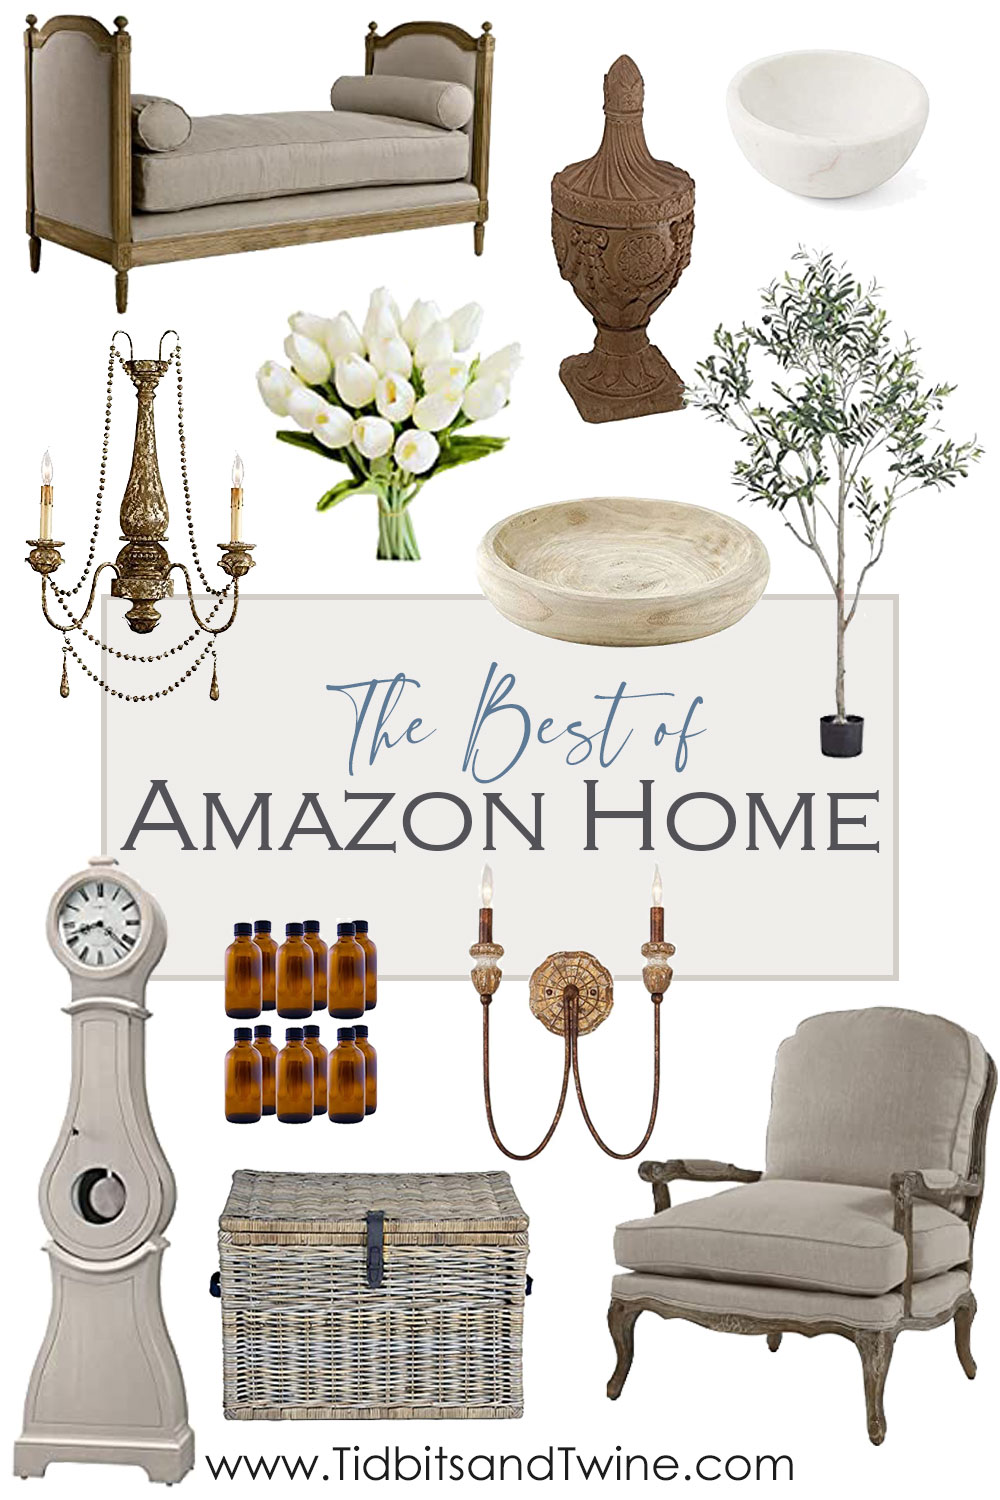 My Best Amazon Home Finds!